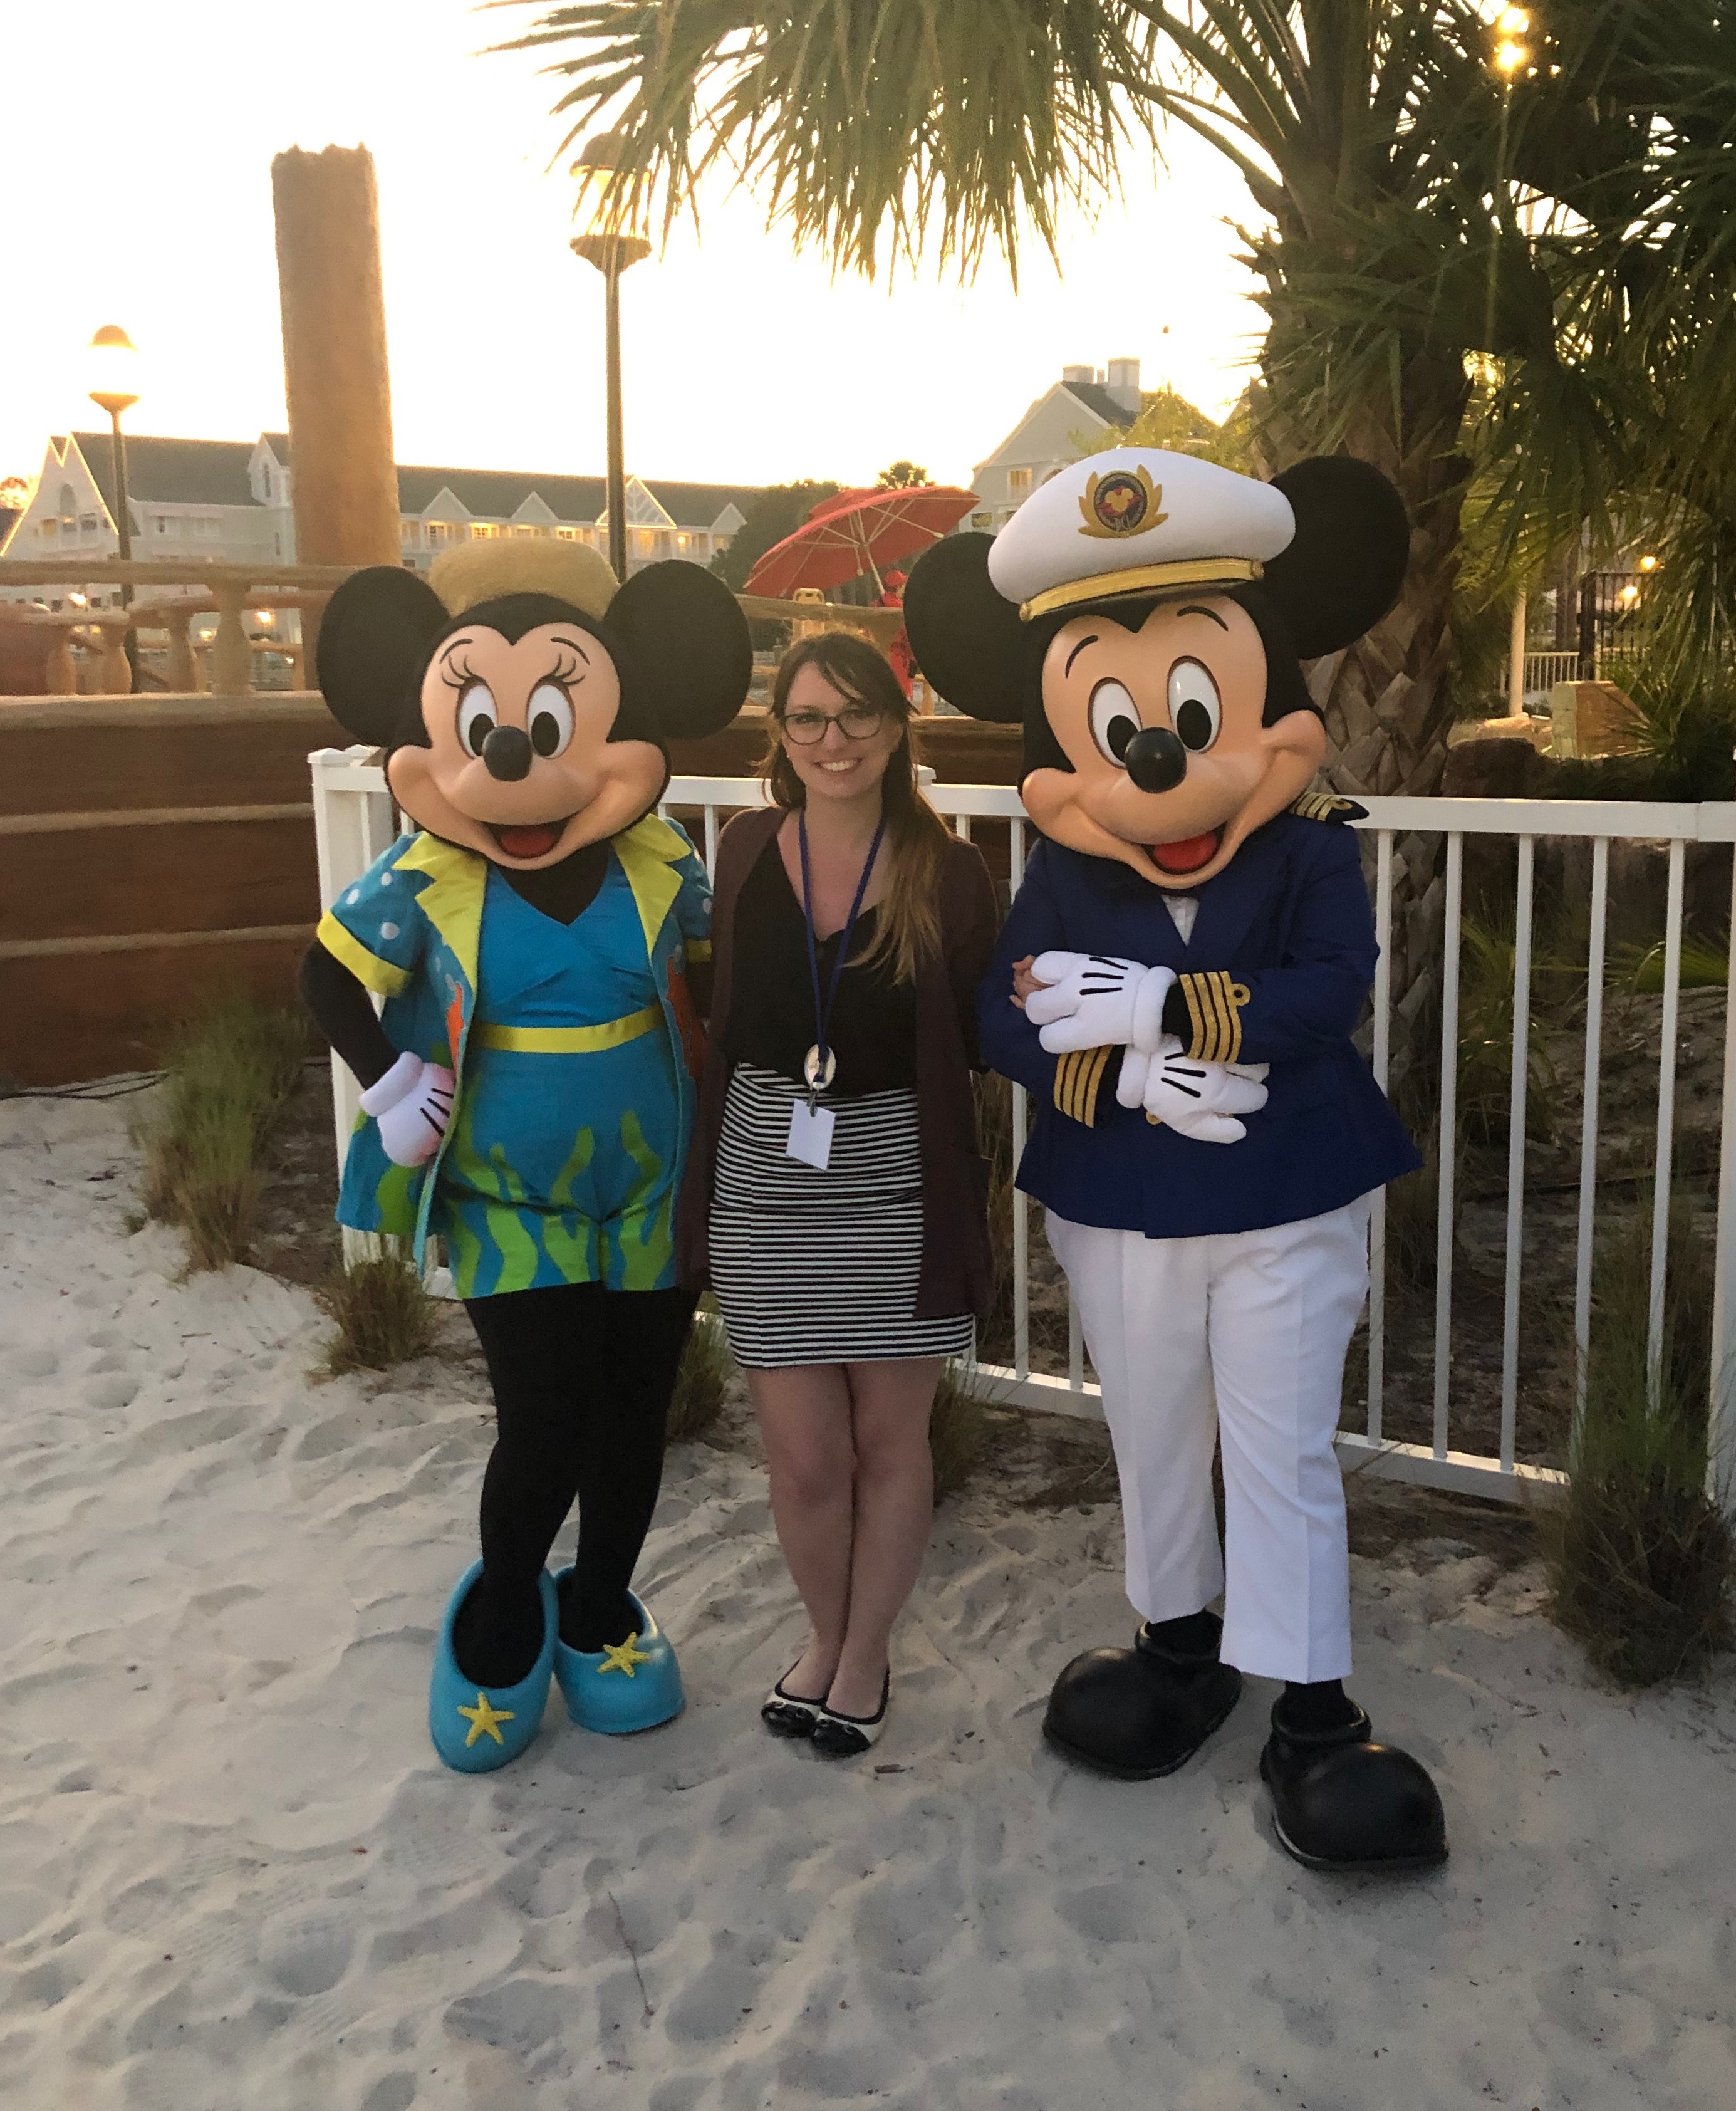 Kelsey BaRoss posing with Mickey and Minnie at the #RaganDisney Social Media Conference